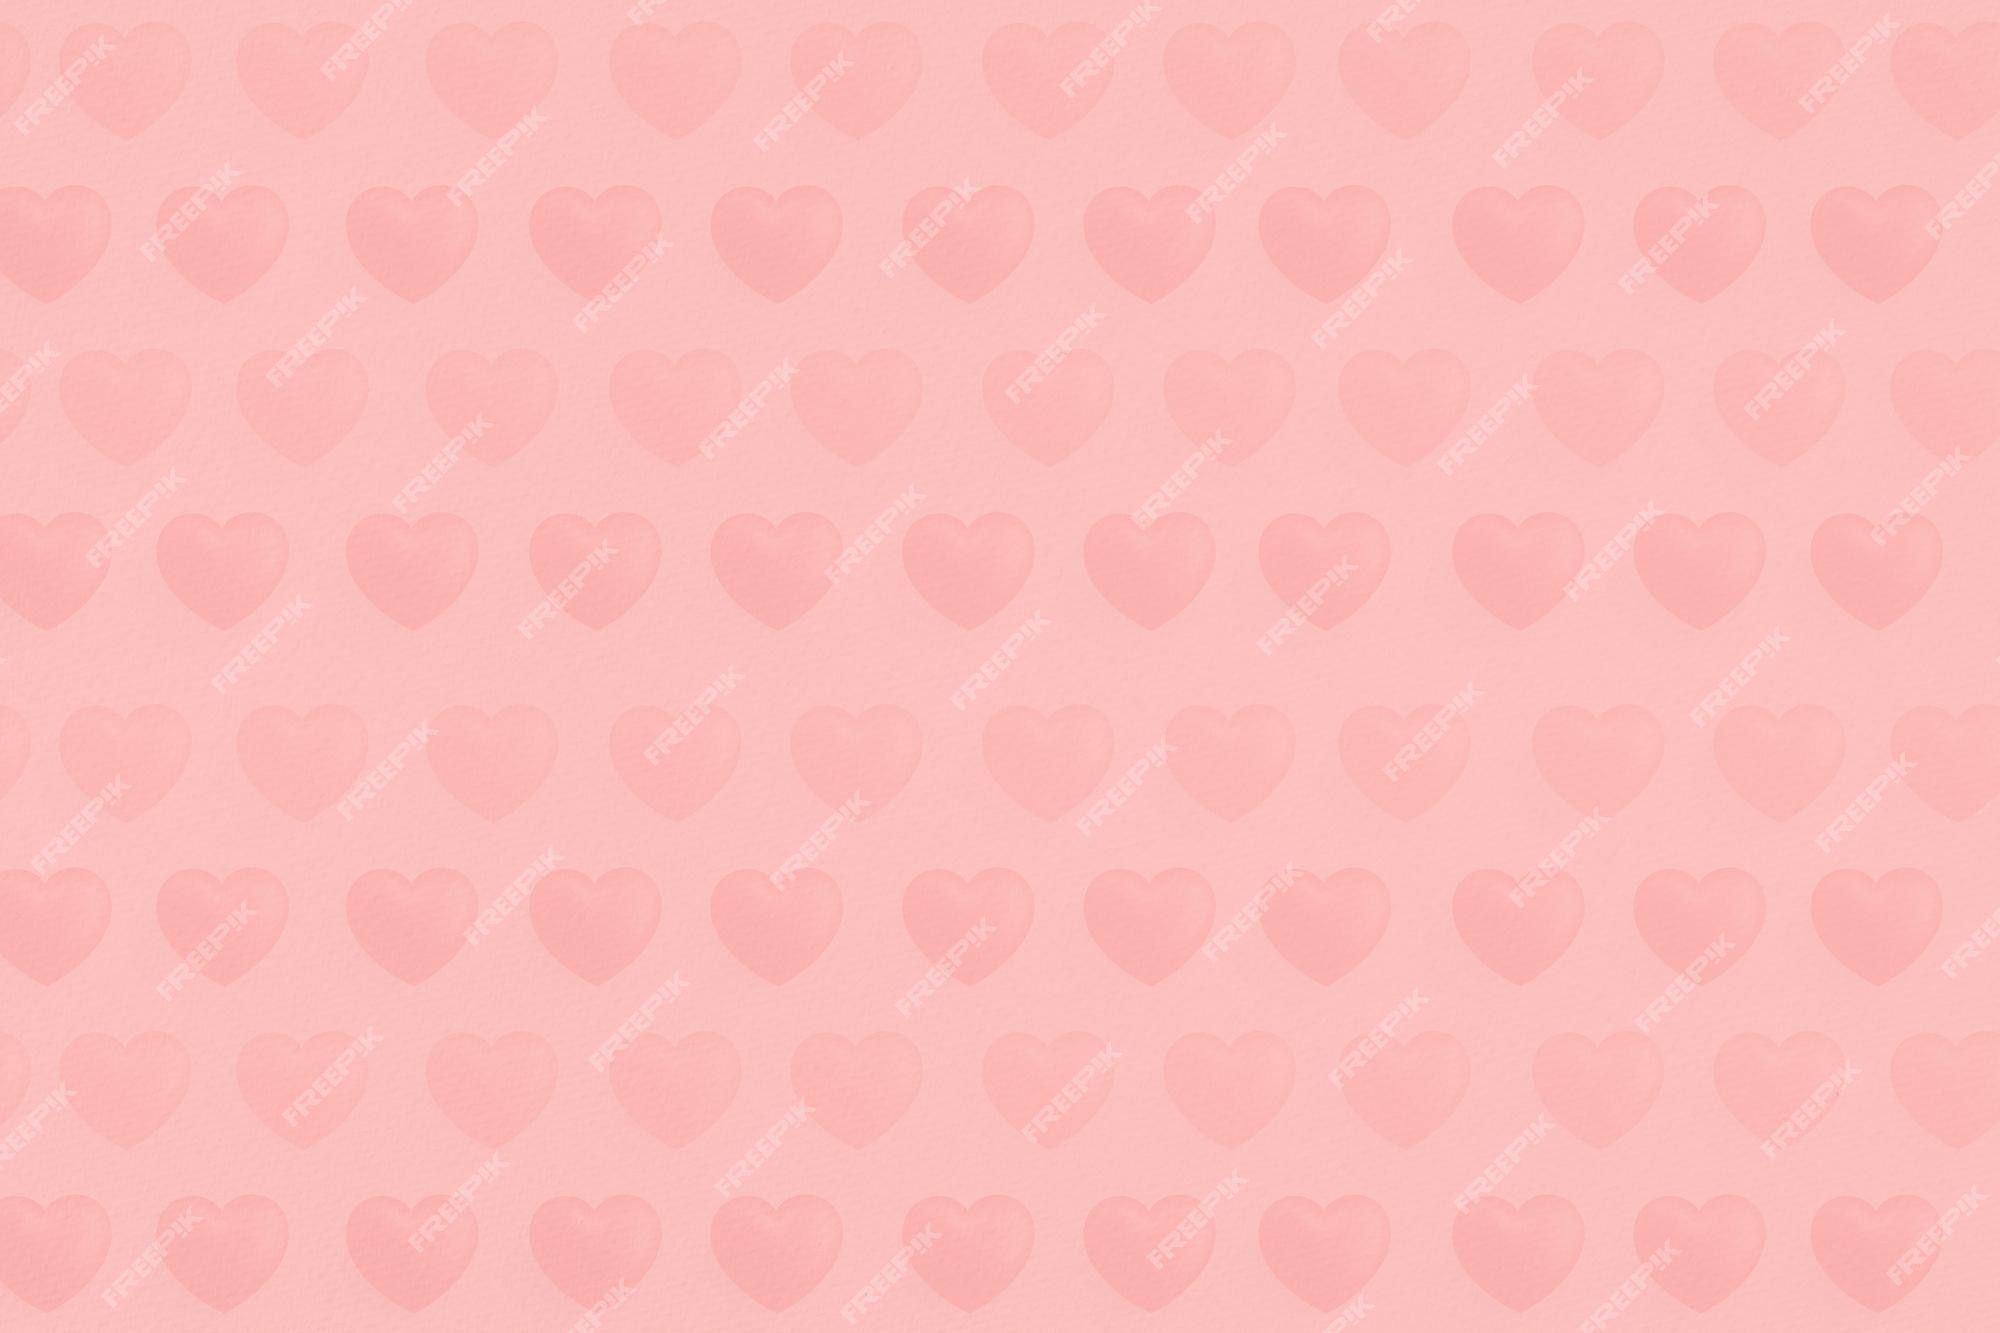 A pink background with a pattern of small hearts - Pink heart